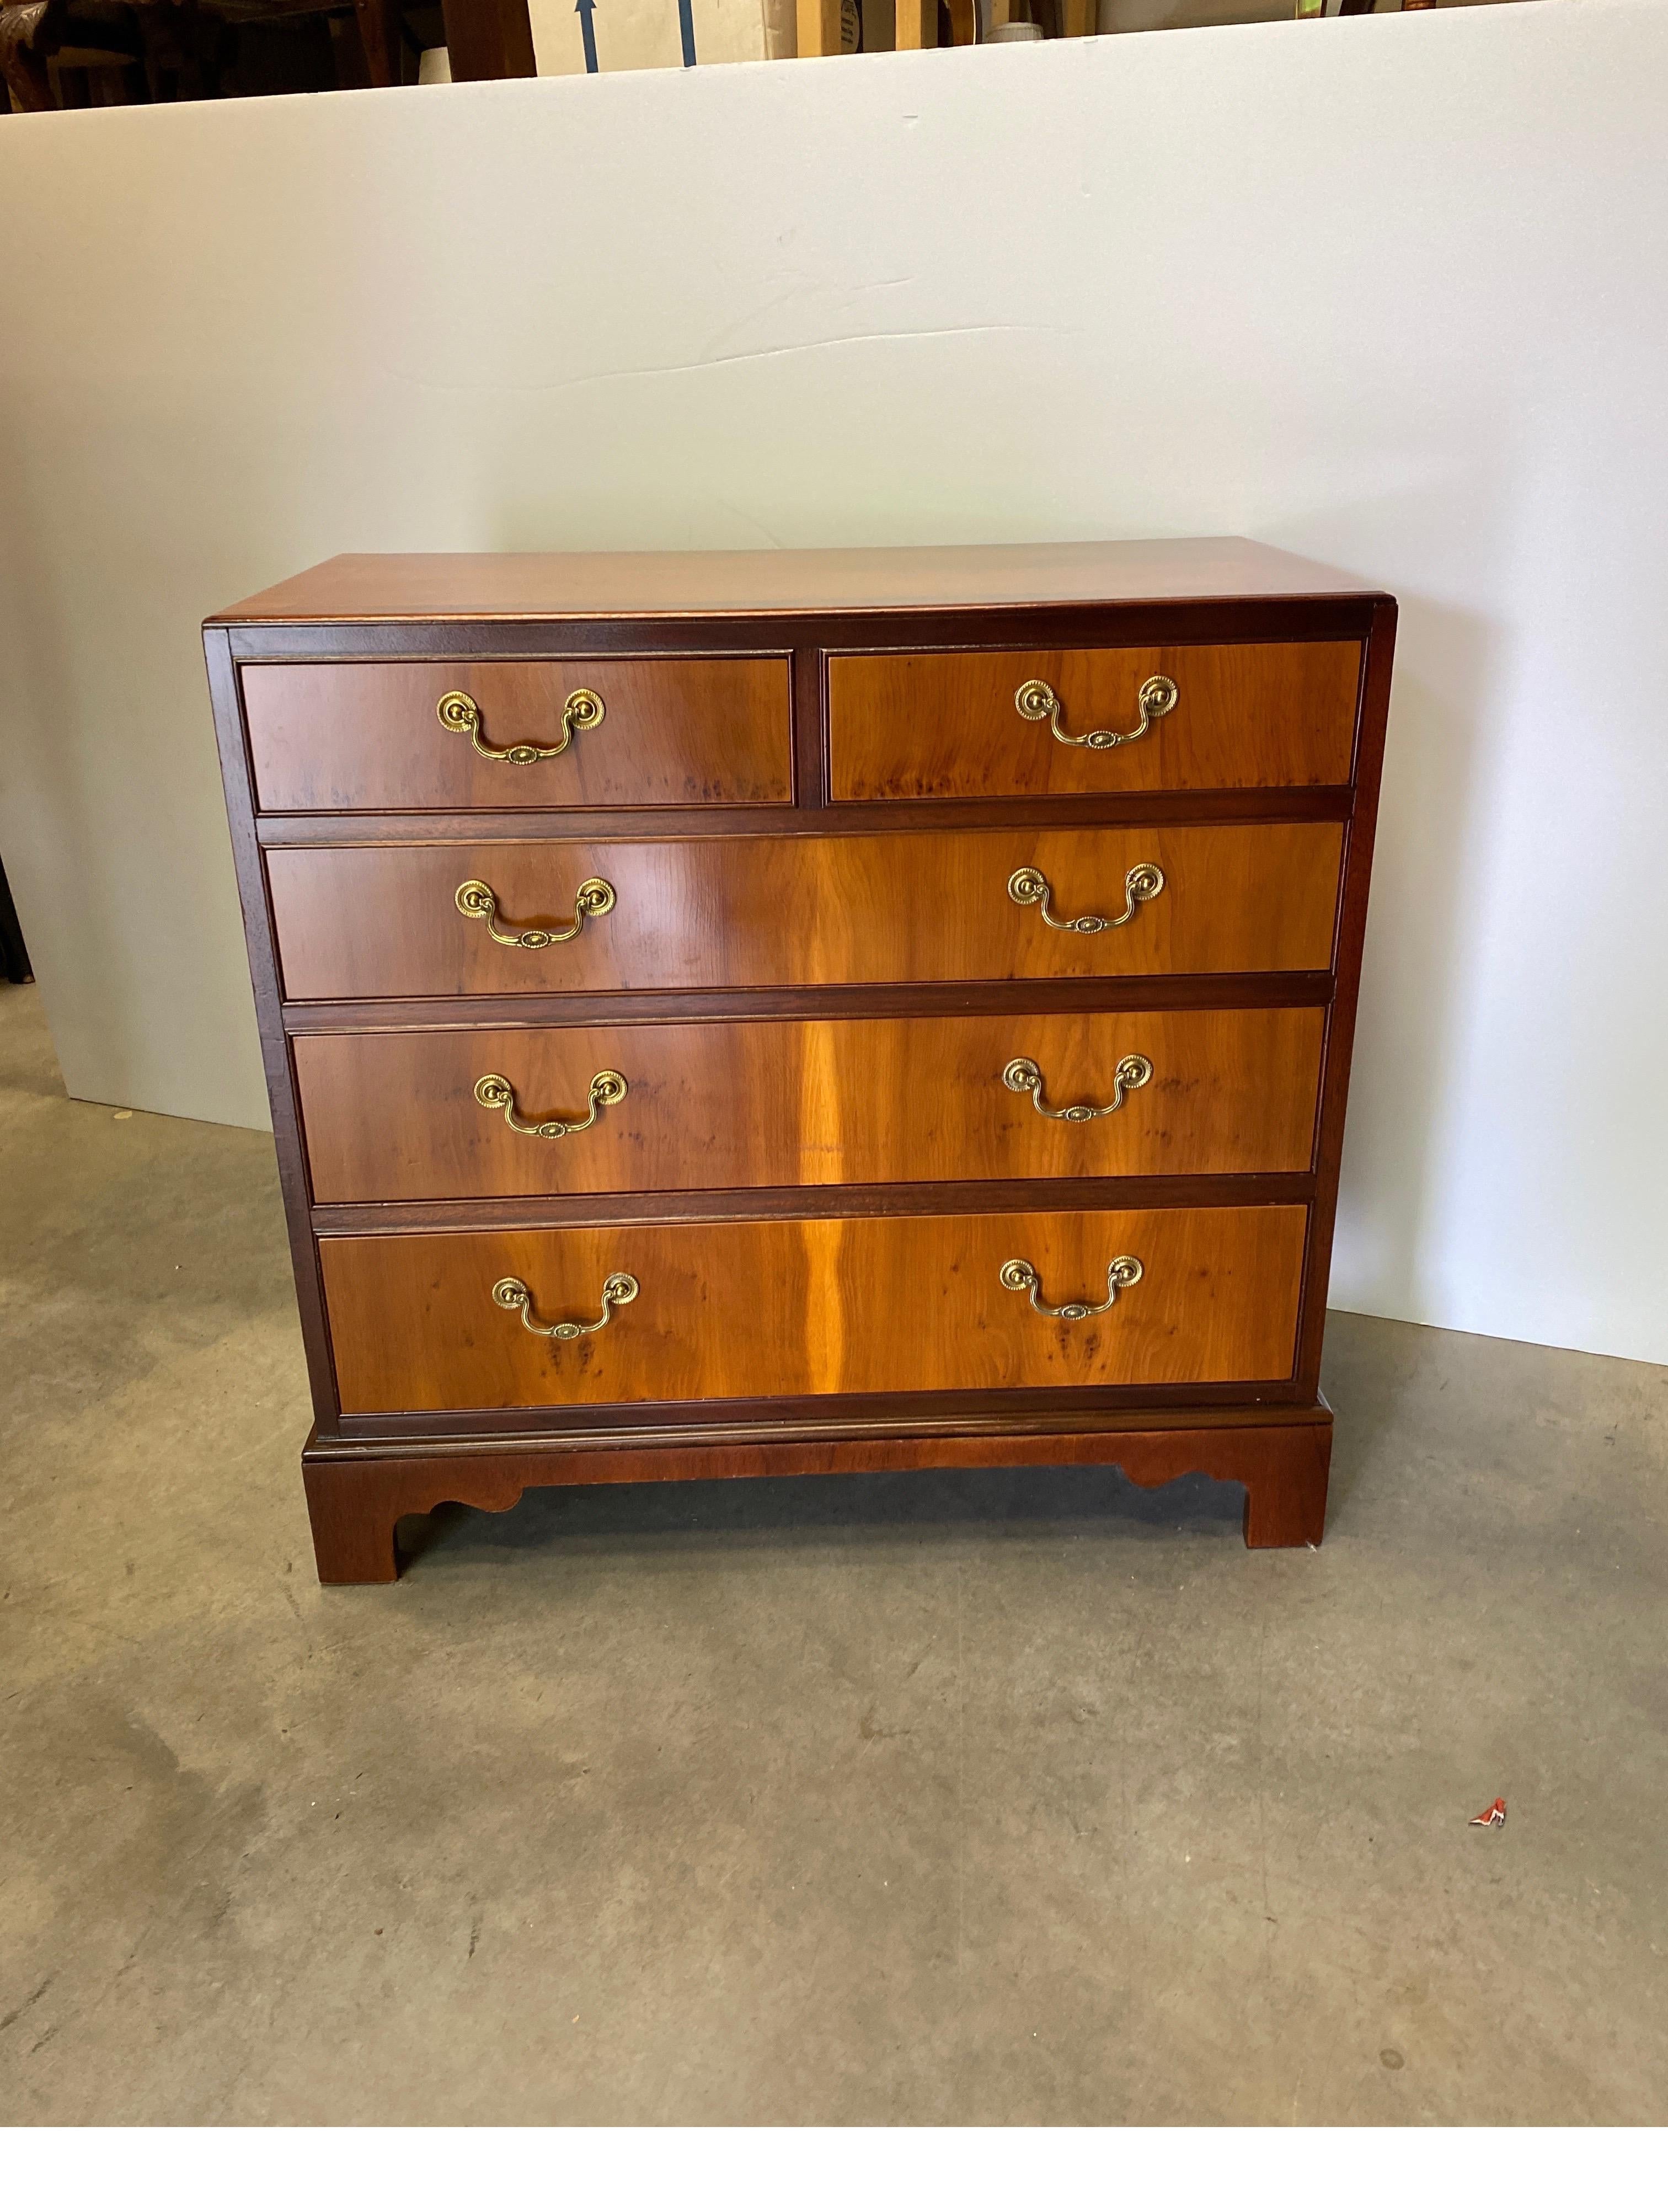 Elegant mahogany and Yew Wood bachelors chest by Baker Furniture. The mahogany top and sides with cross banding decoration. The drawer fronts with yew wood which contrasts beautifully with the mahogany. Marked Baker Furniture on the inside top